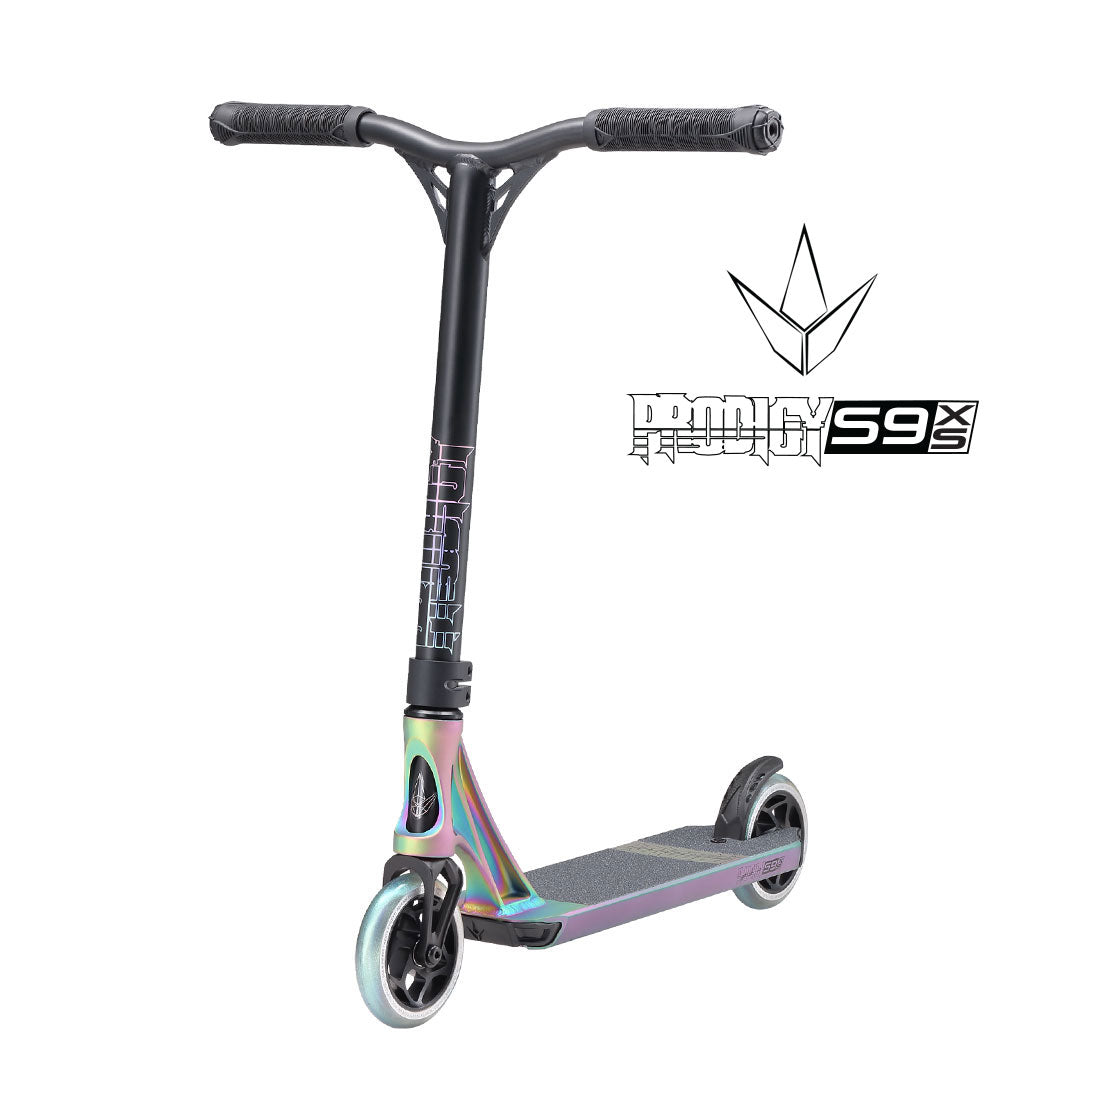 Envy Prodigy S9 XS Complete - Matte Oil Slick Scooter Completes Trick